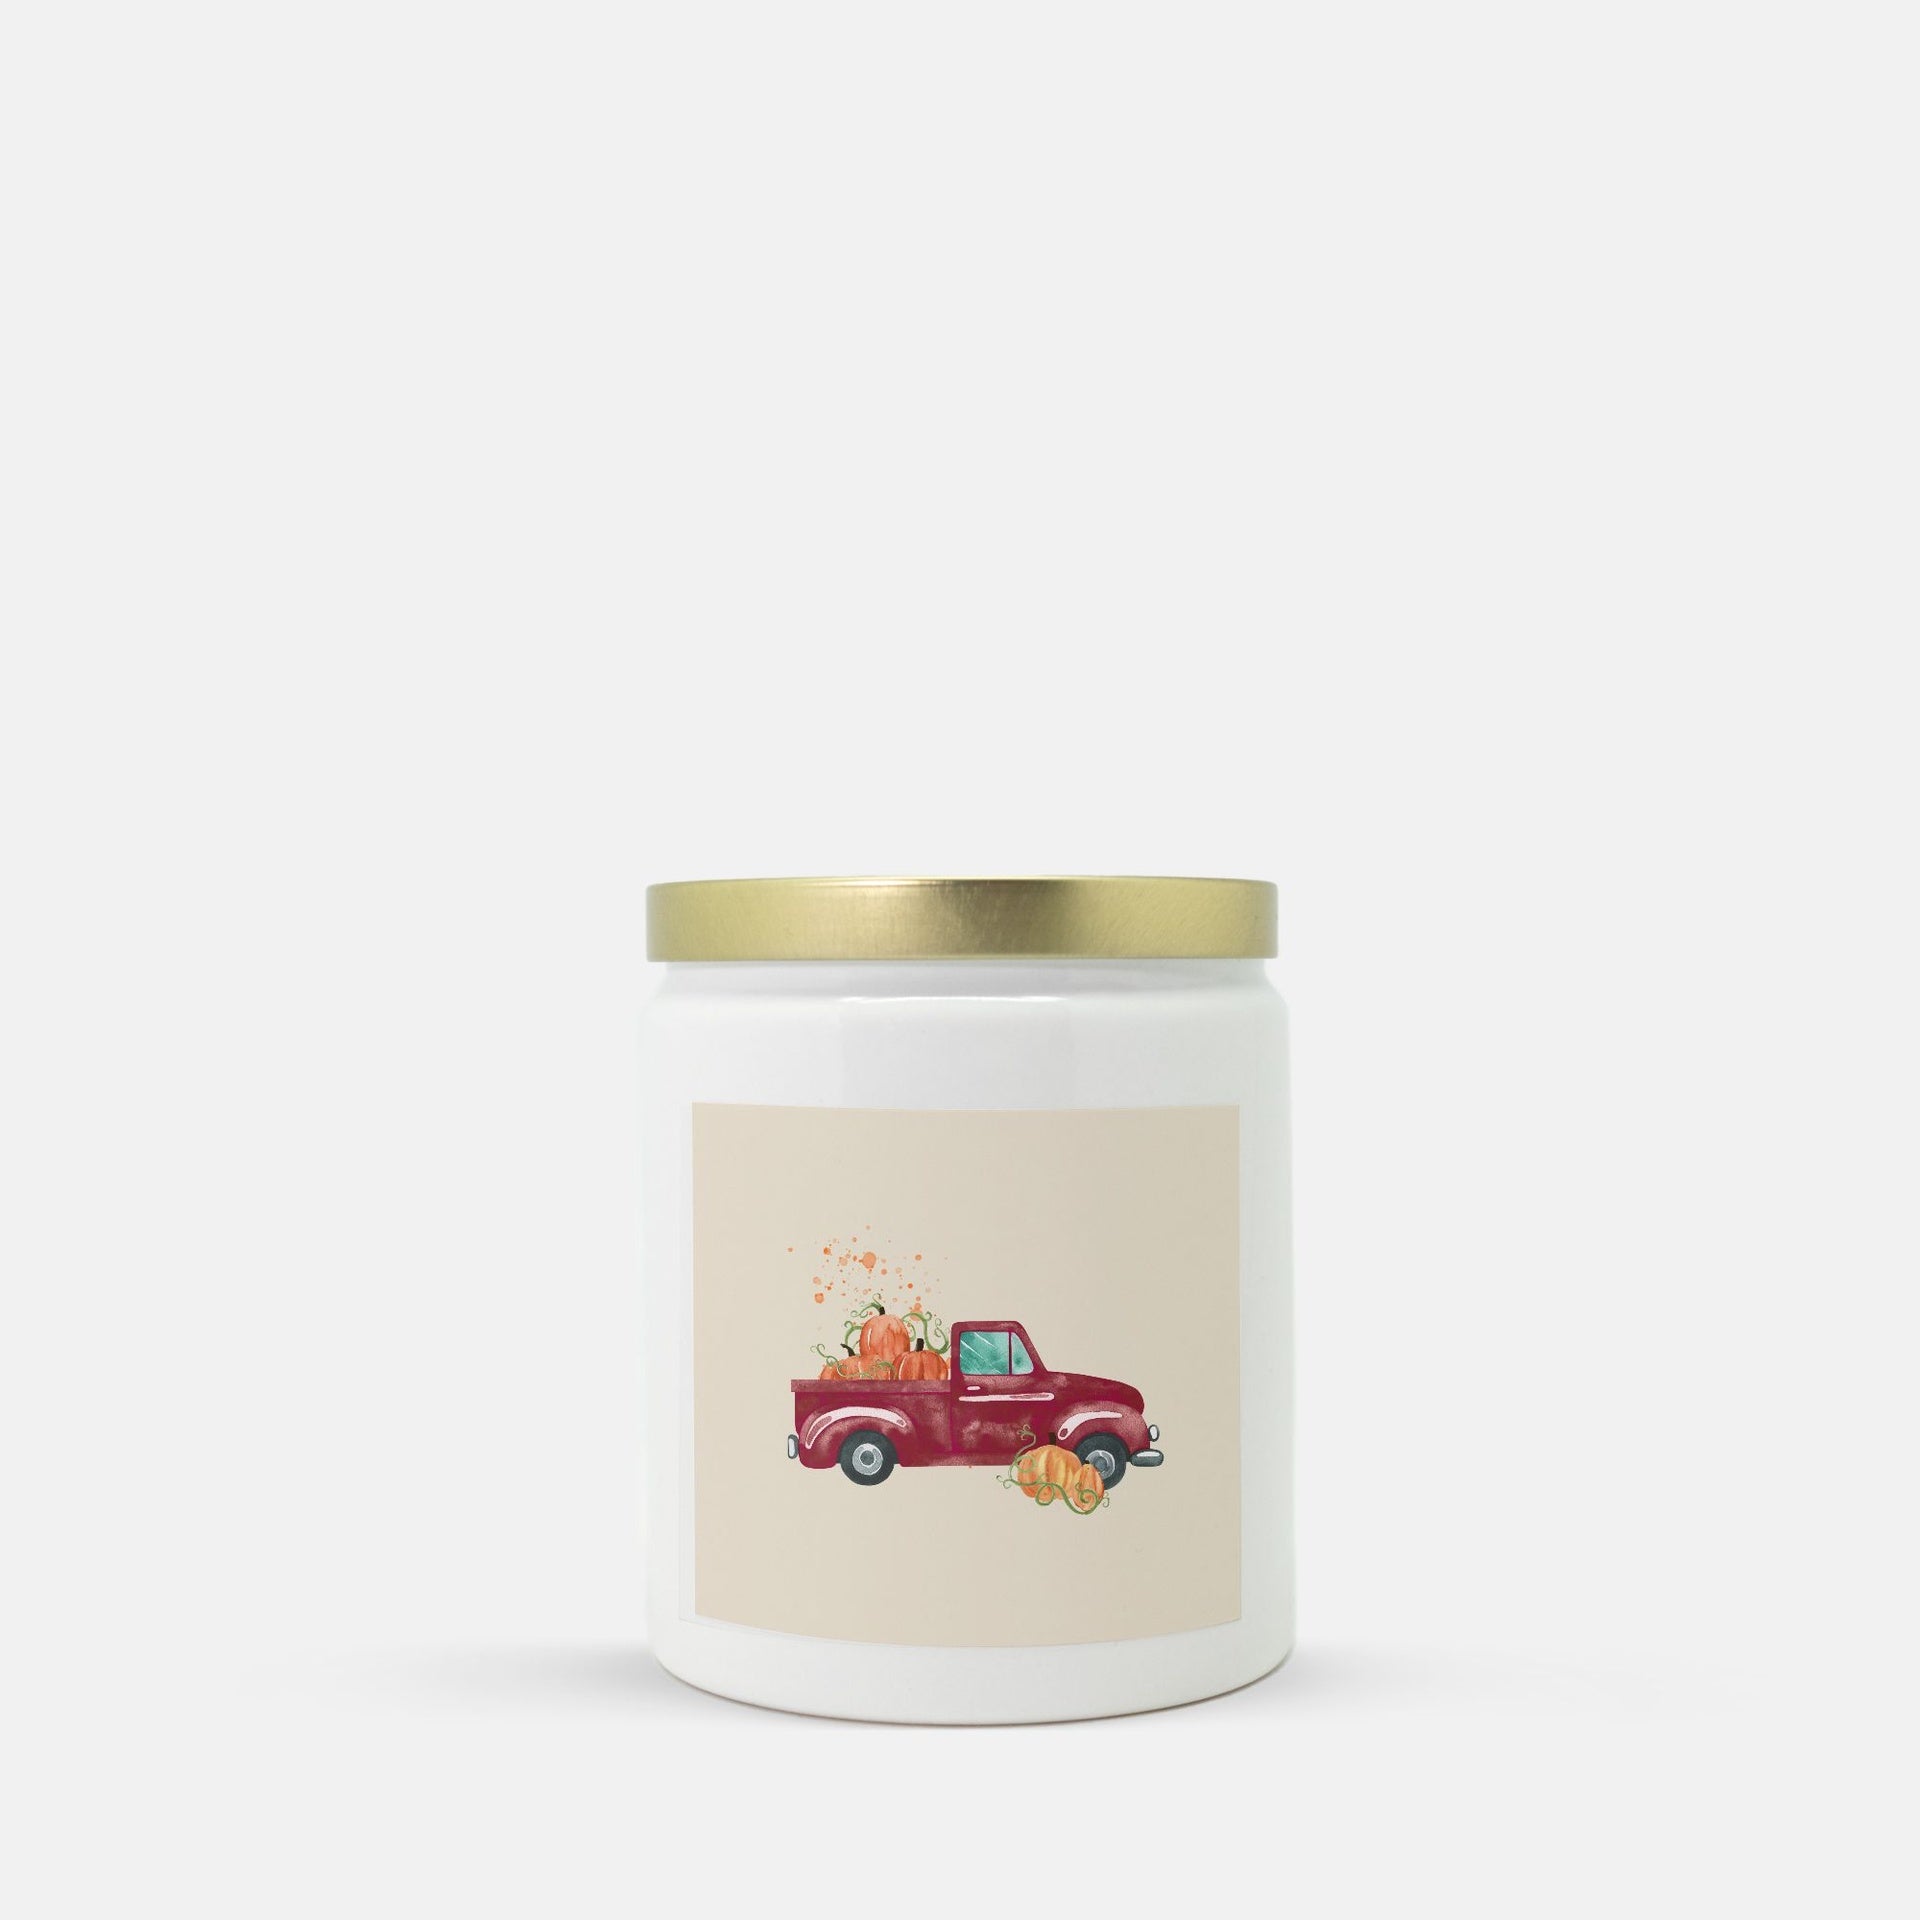 Lifestyle Details - Burgundy Rustic Truck Ceramic Candle w Gold Lid - Vanilla Bean